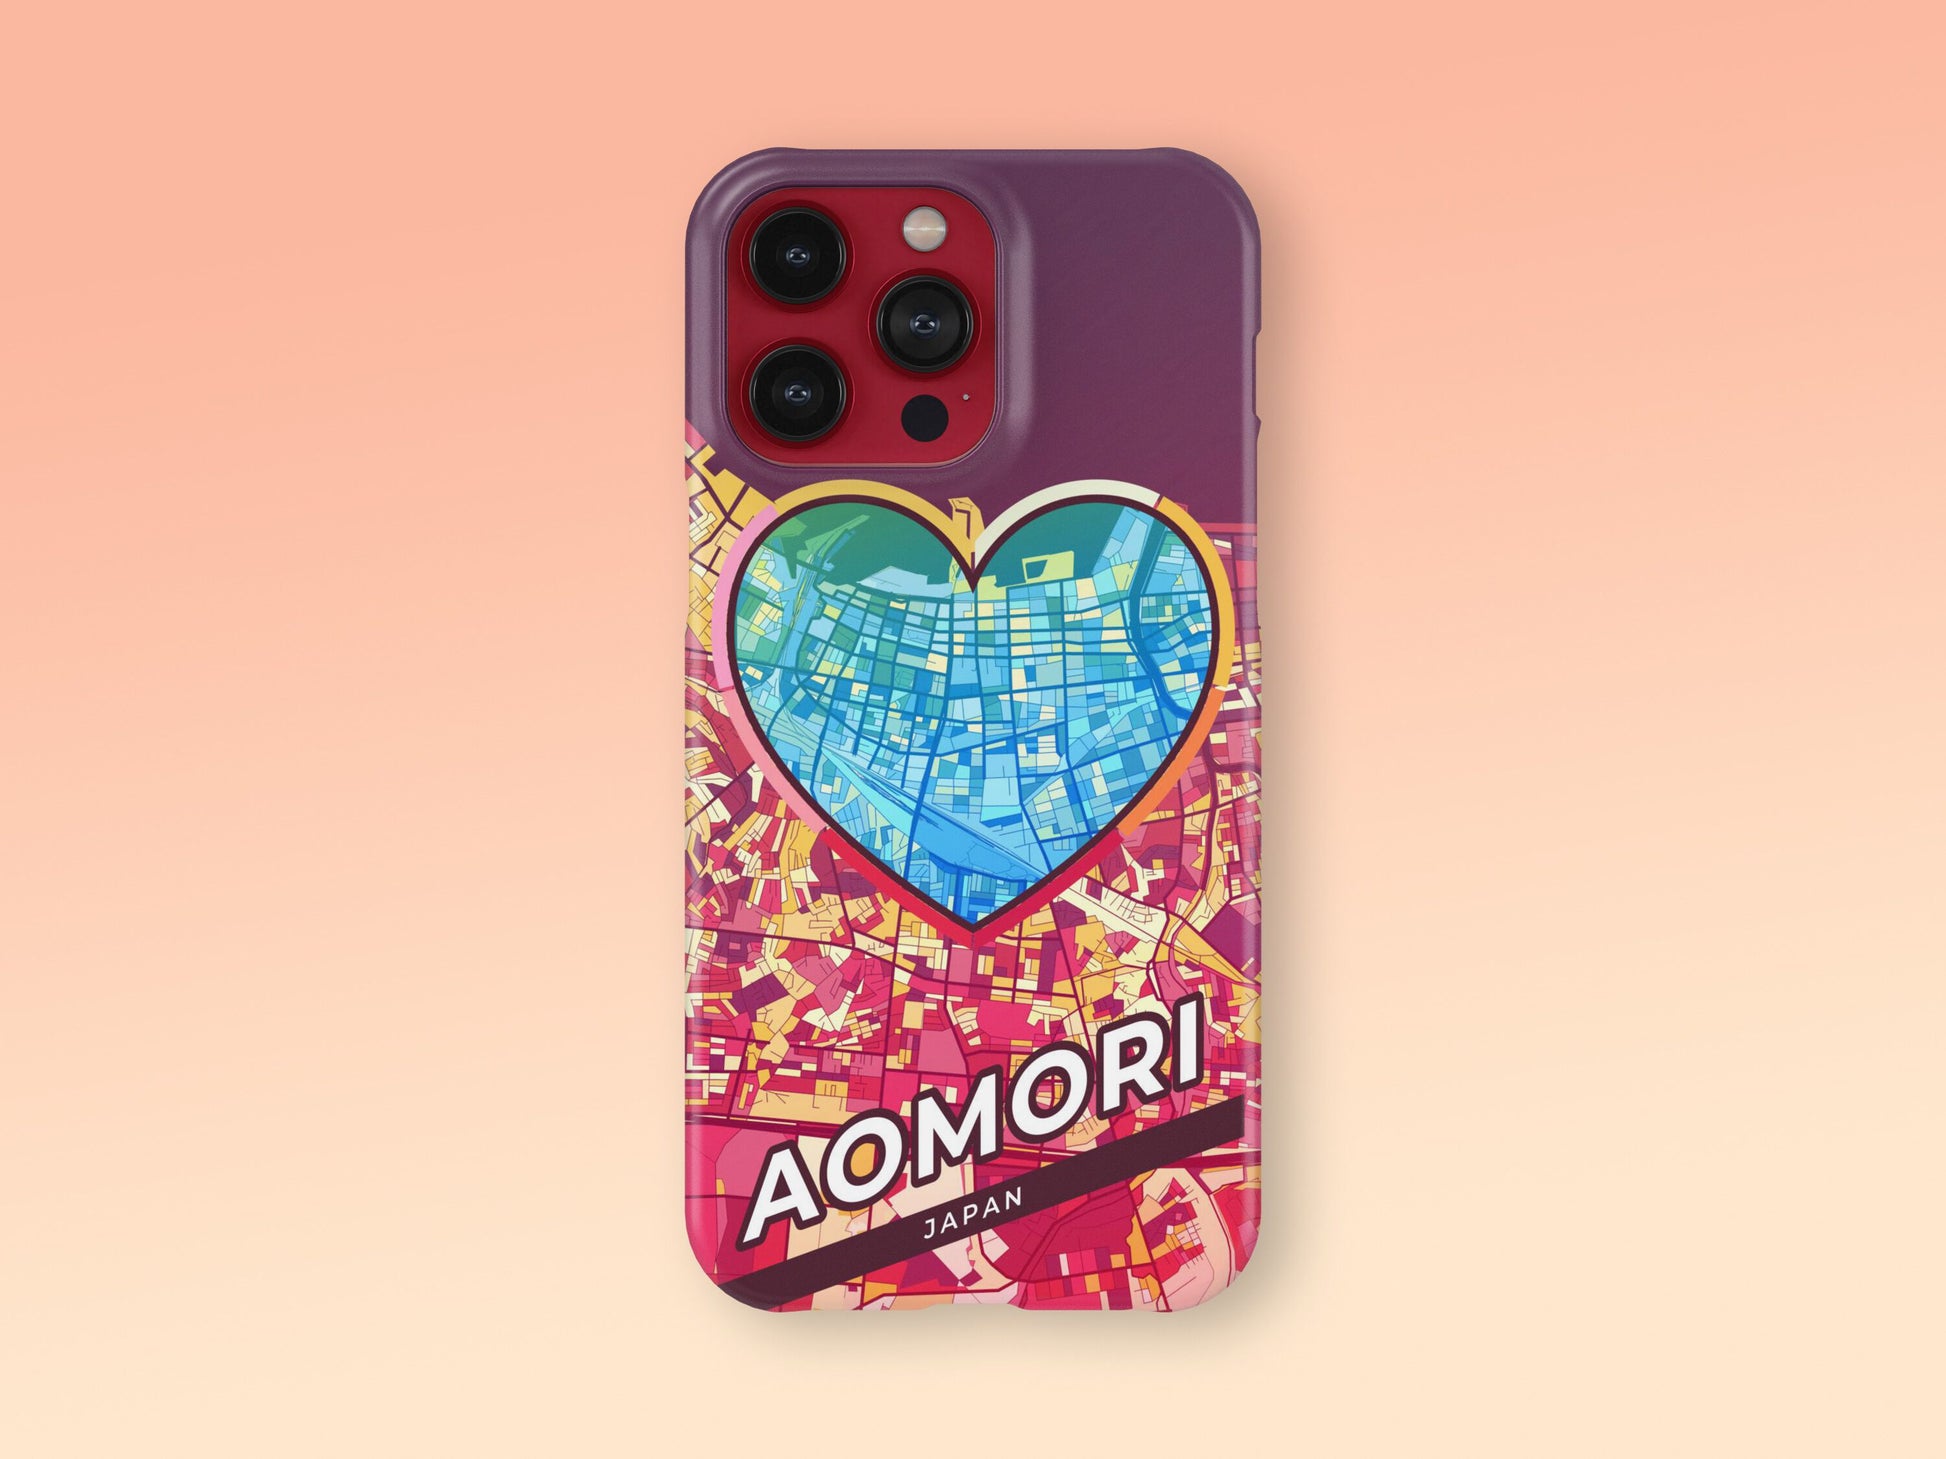 Aomori Japan slim phone case with colorful icon. Birthday, wedding or housewarming gift. Couple match cases. 2